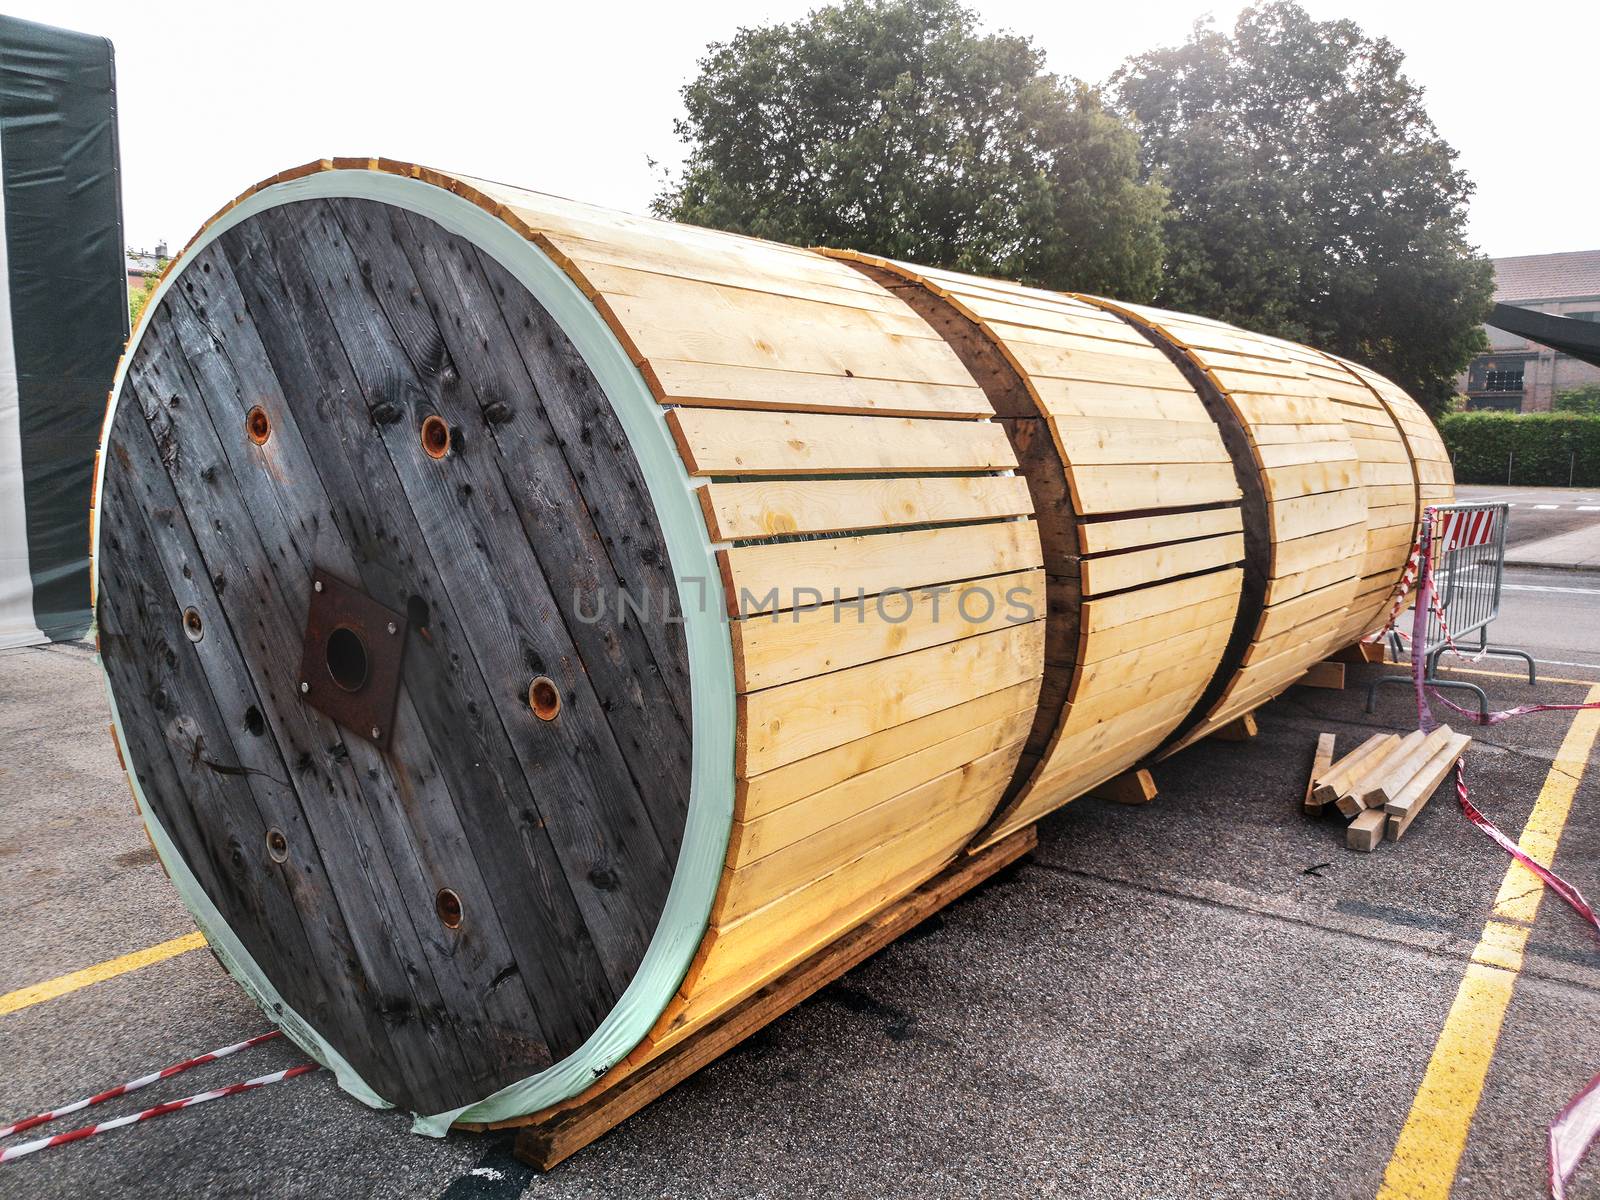 large containers for storing large electrical cables to be installed by LucaLorenzelli